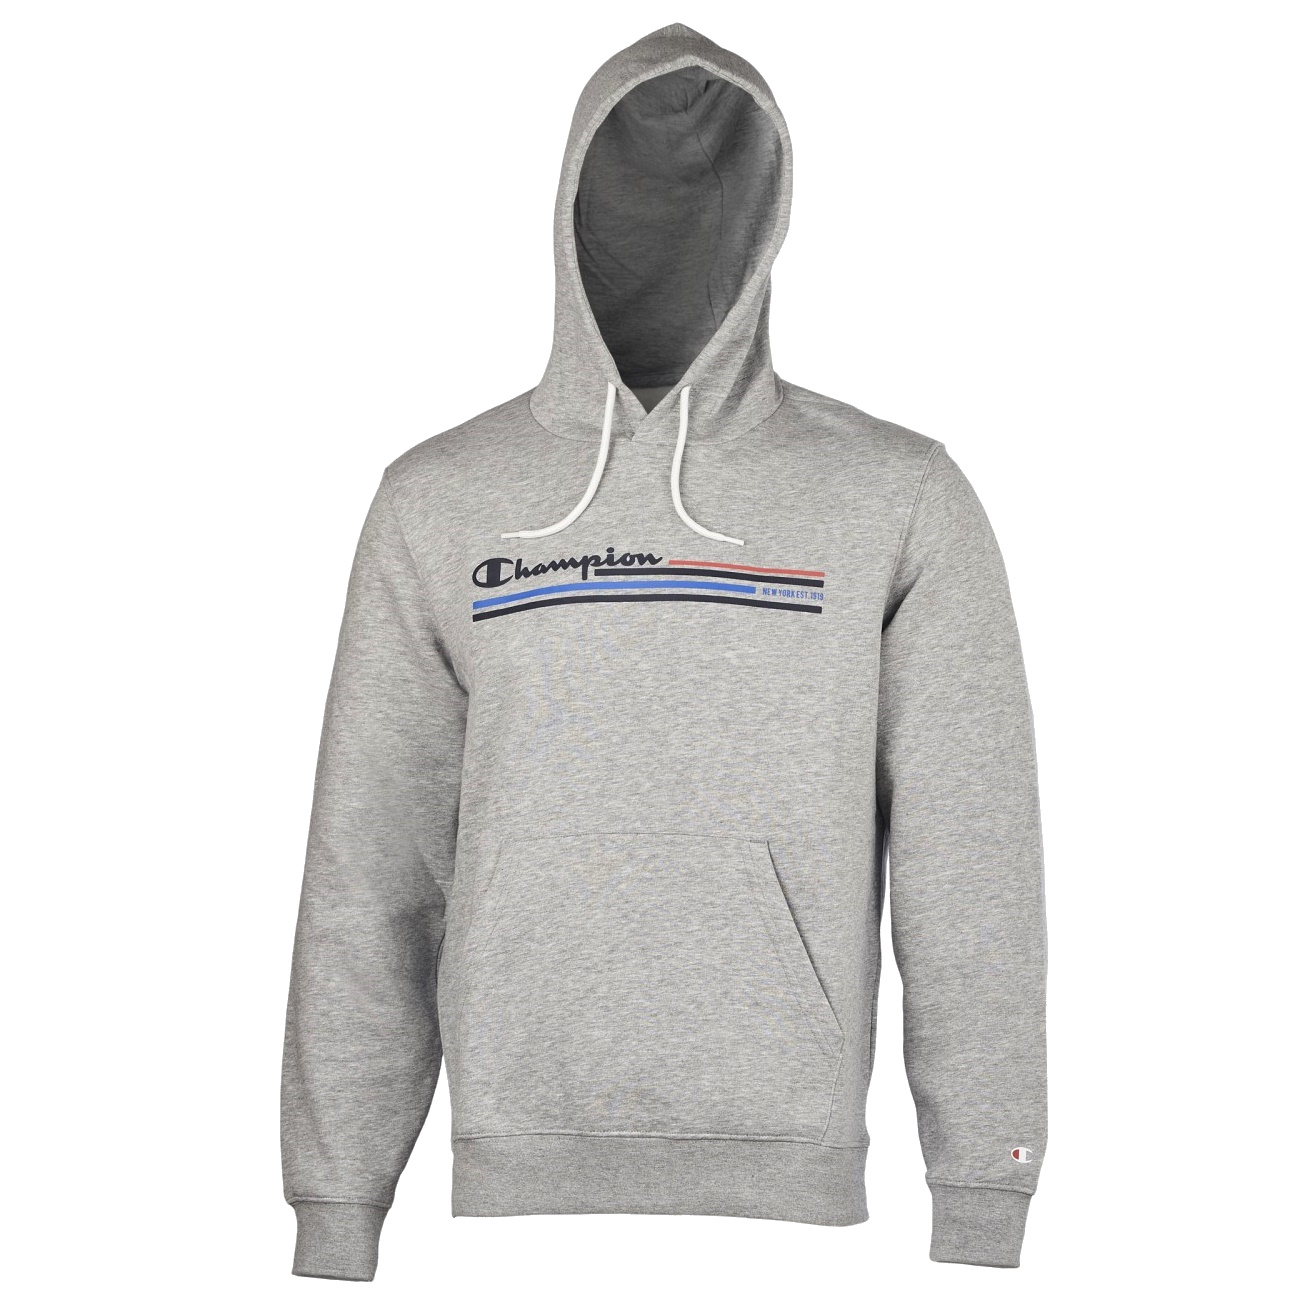 champion-authentic-classic-rochester-ny-1919-logo-hoodie-em006-1.jpg